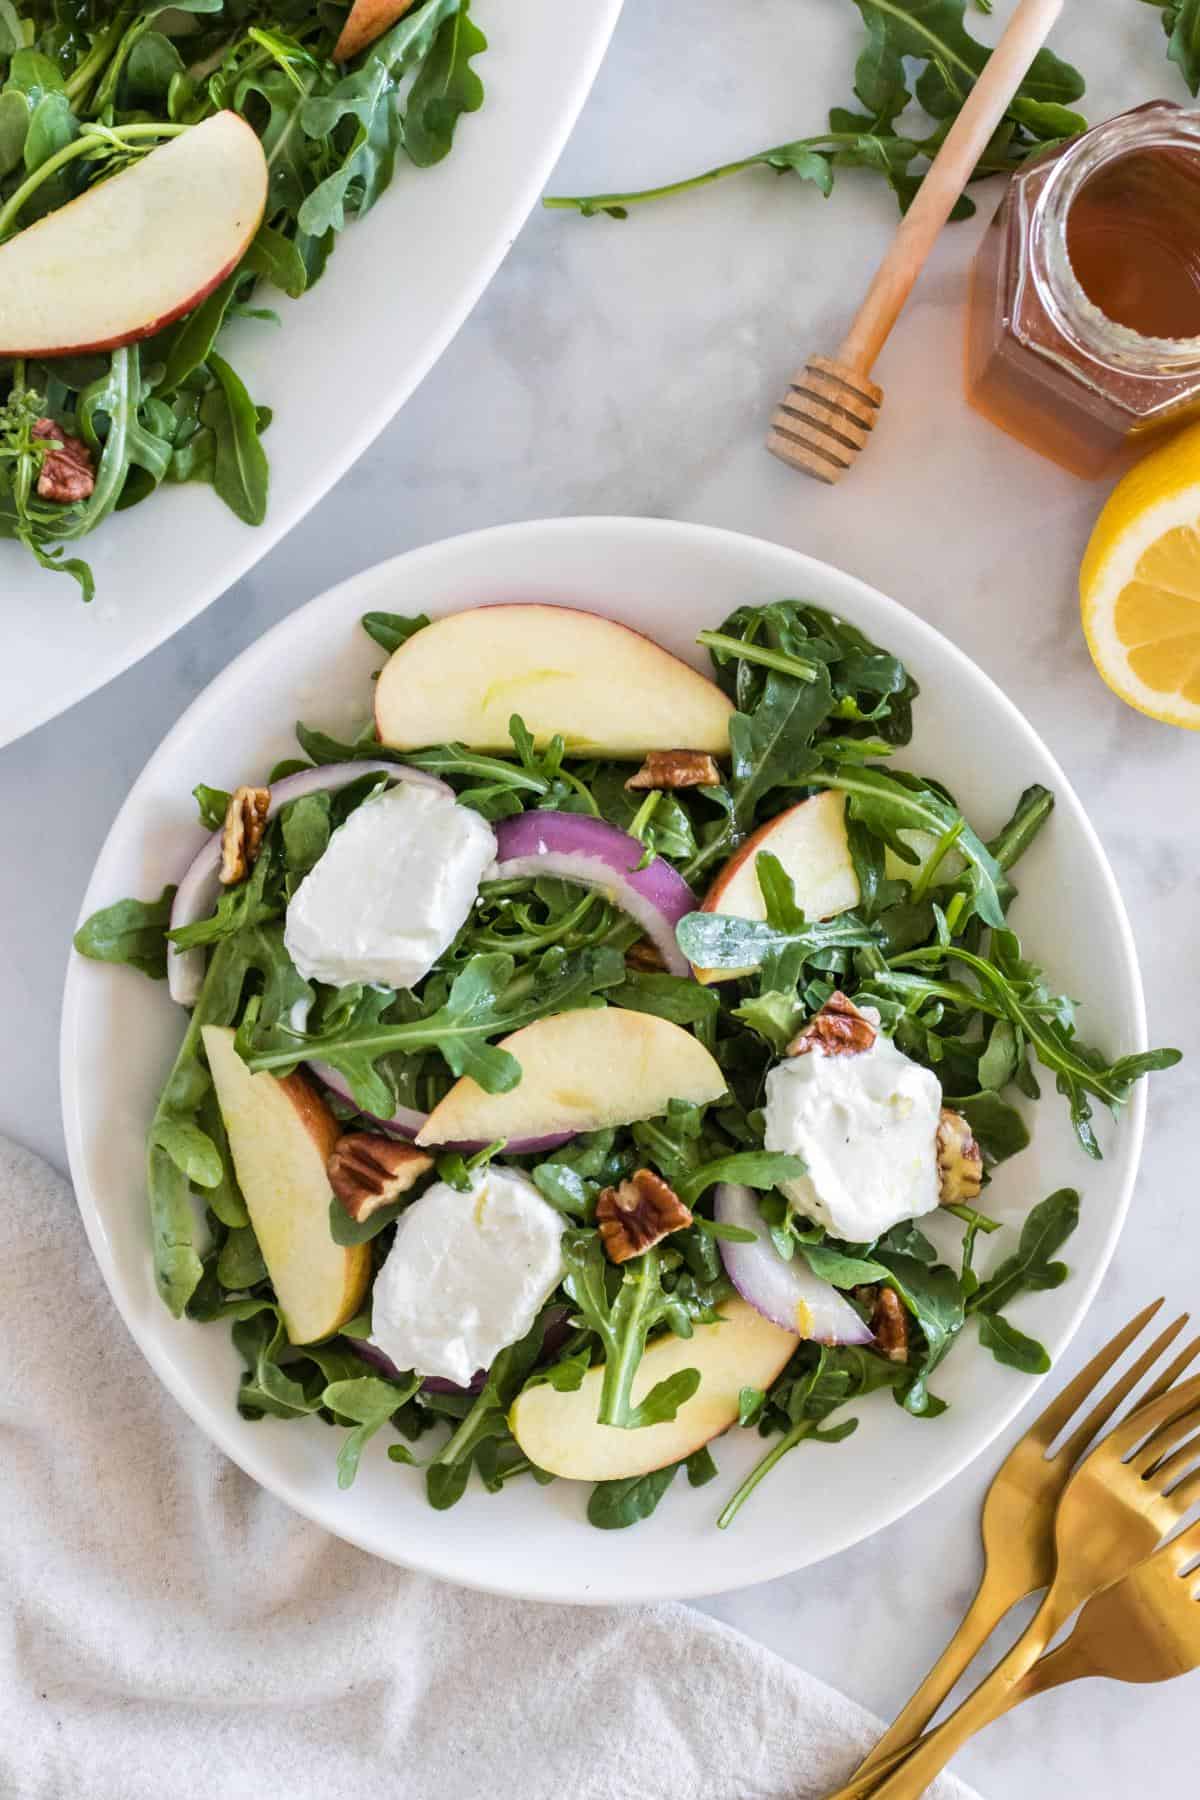 Apple and Arugula salad with goat cheese and pecans being served on a plate.